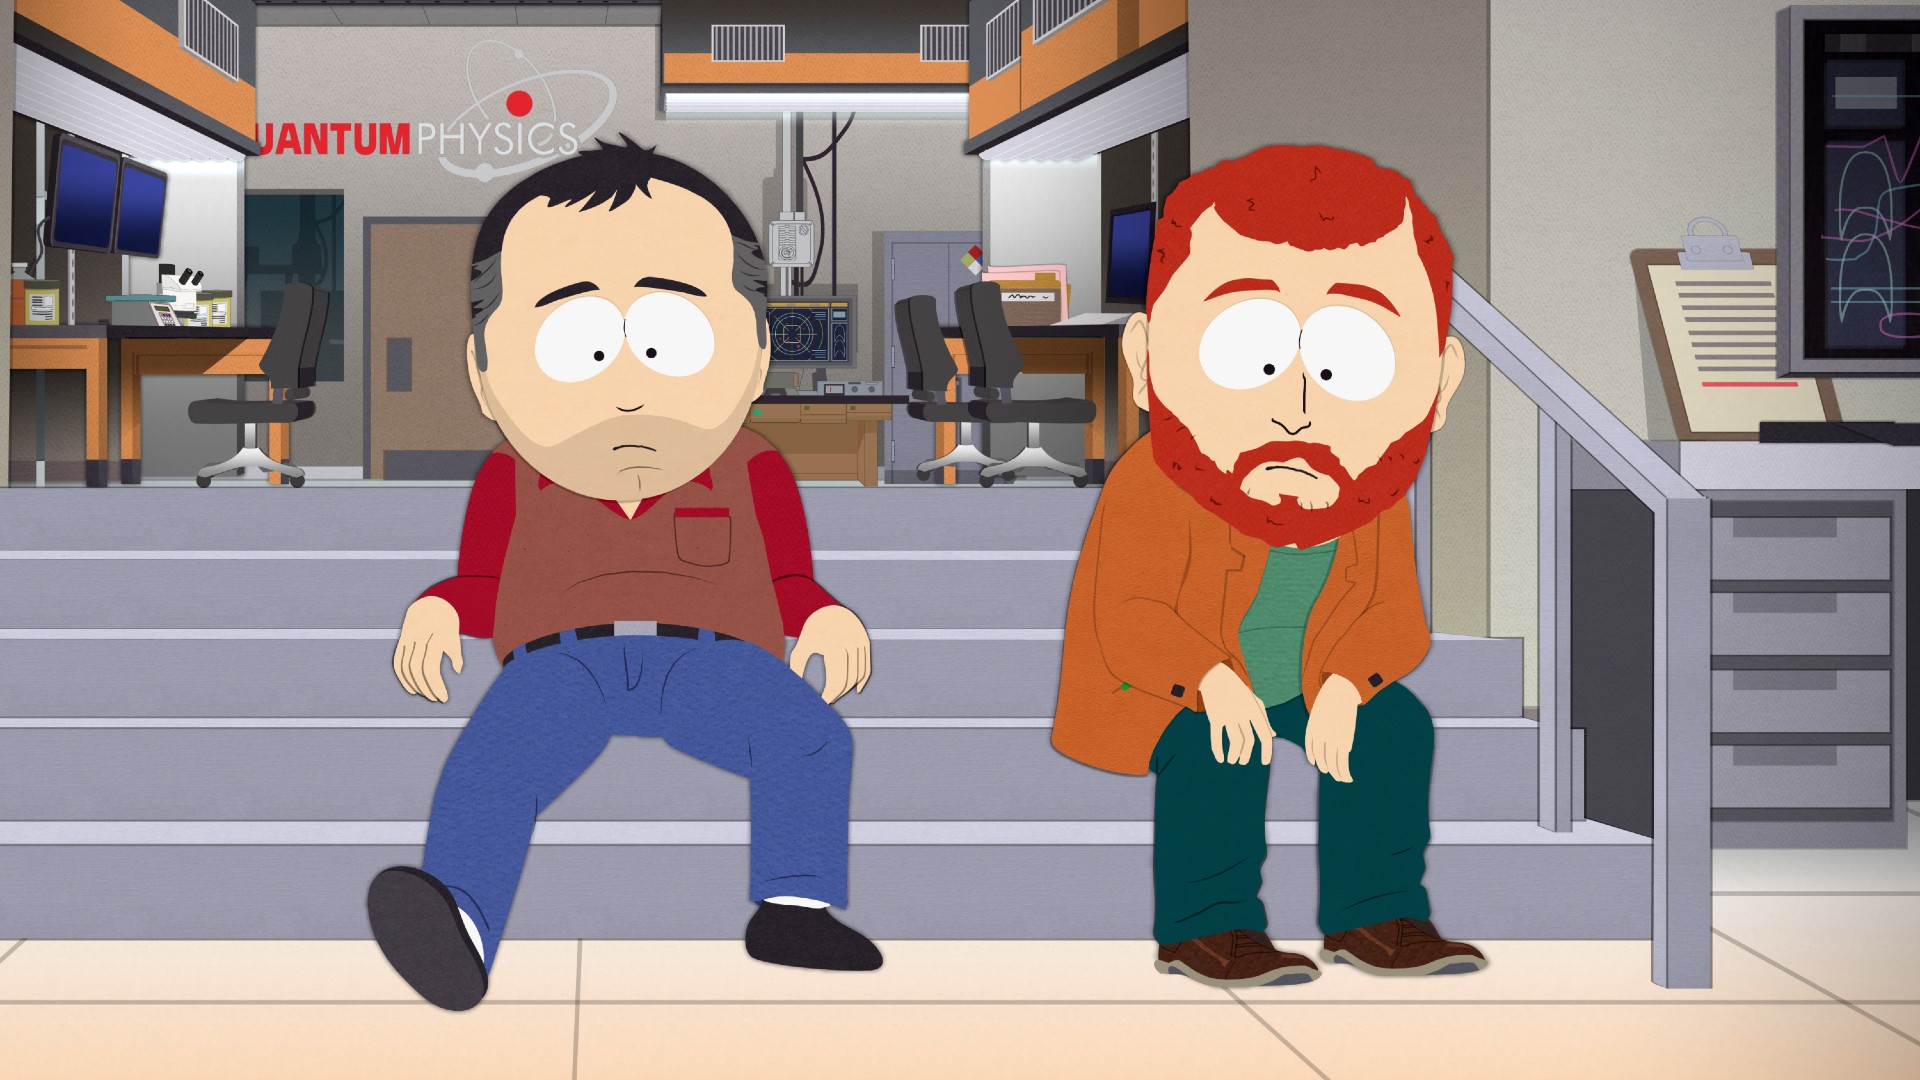 South Park's brazen, occasionally clumsy new season is its most